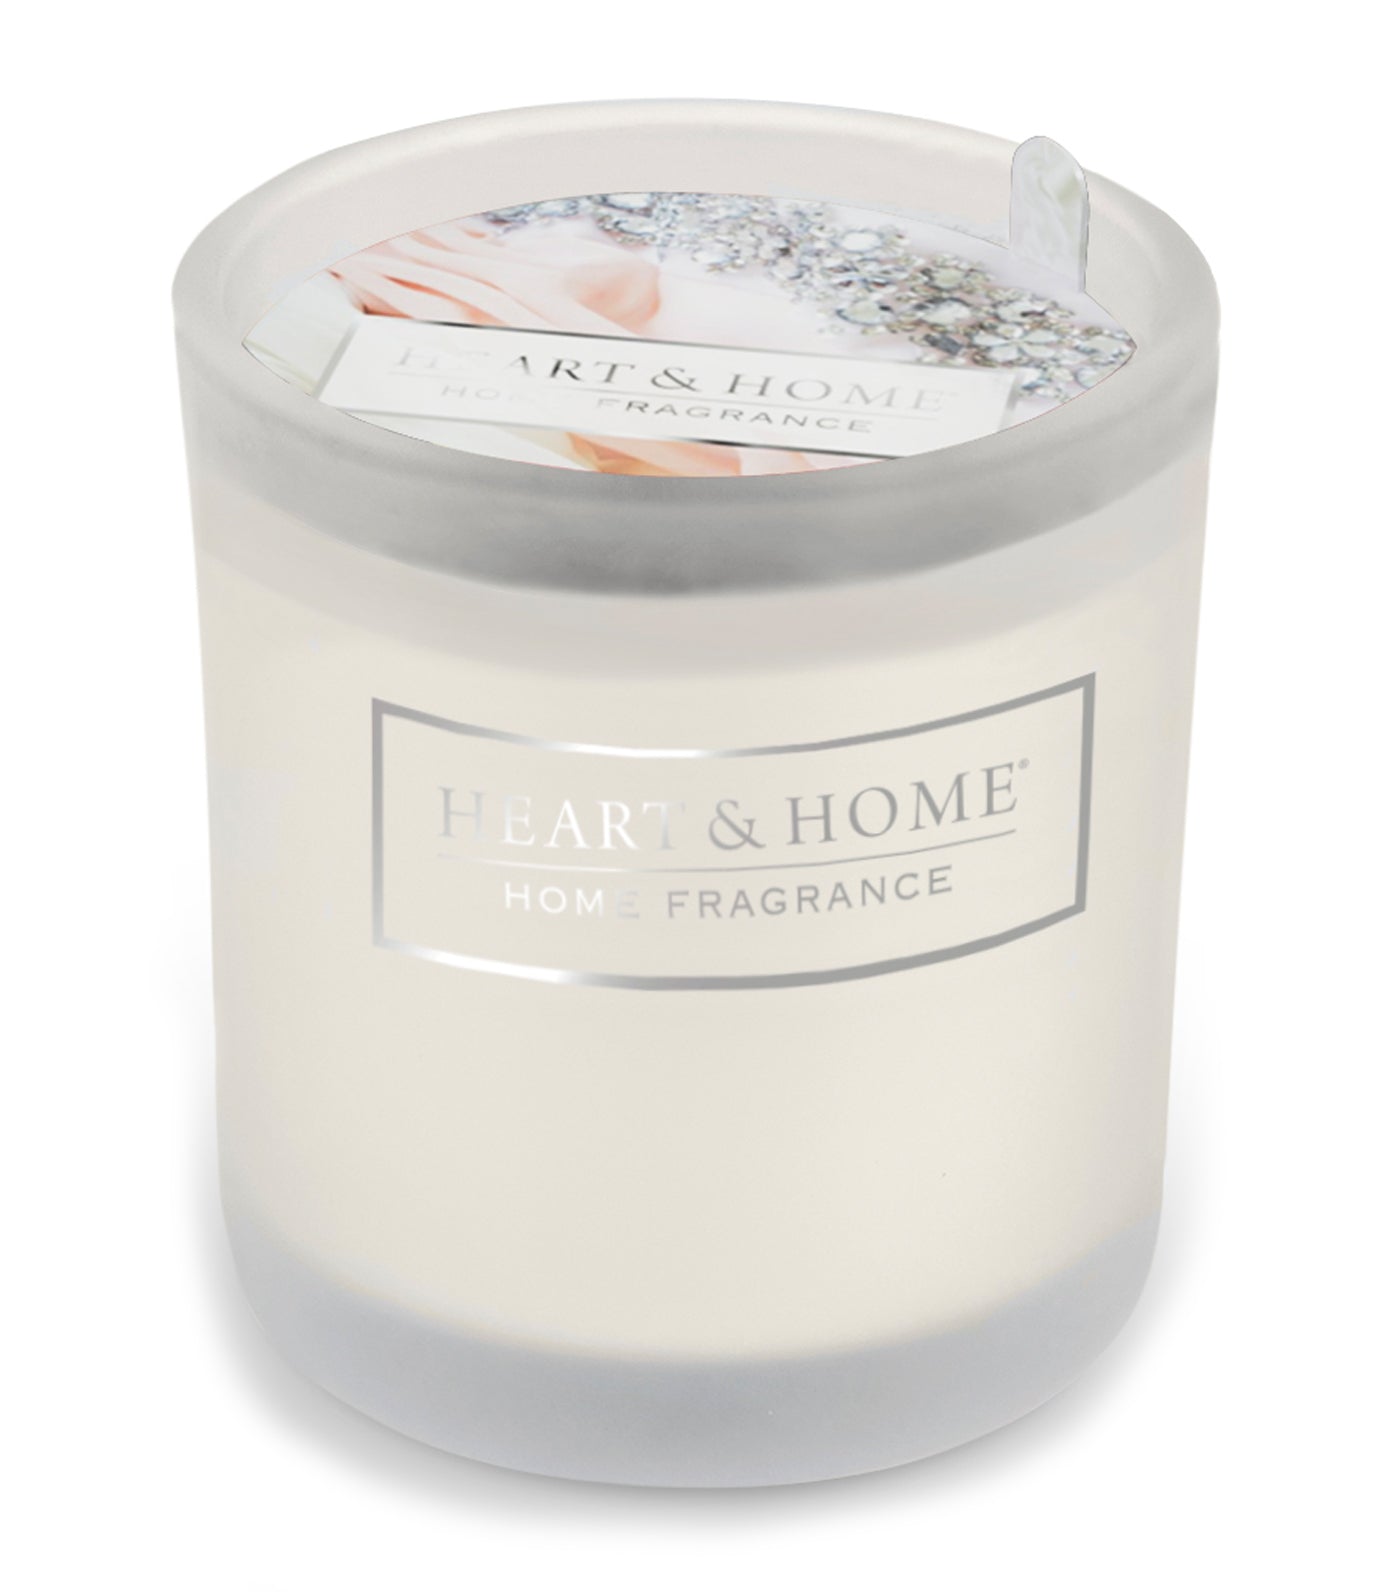 heart & home true enchantment - glass votive soy candle